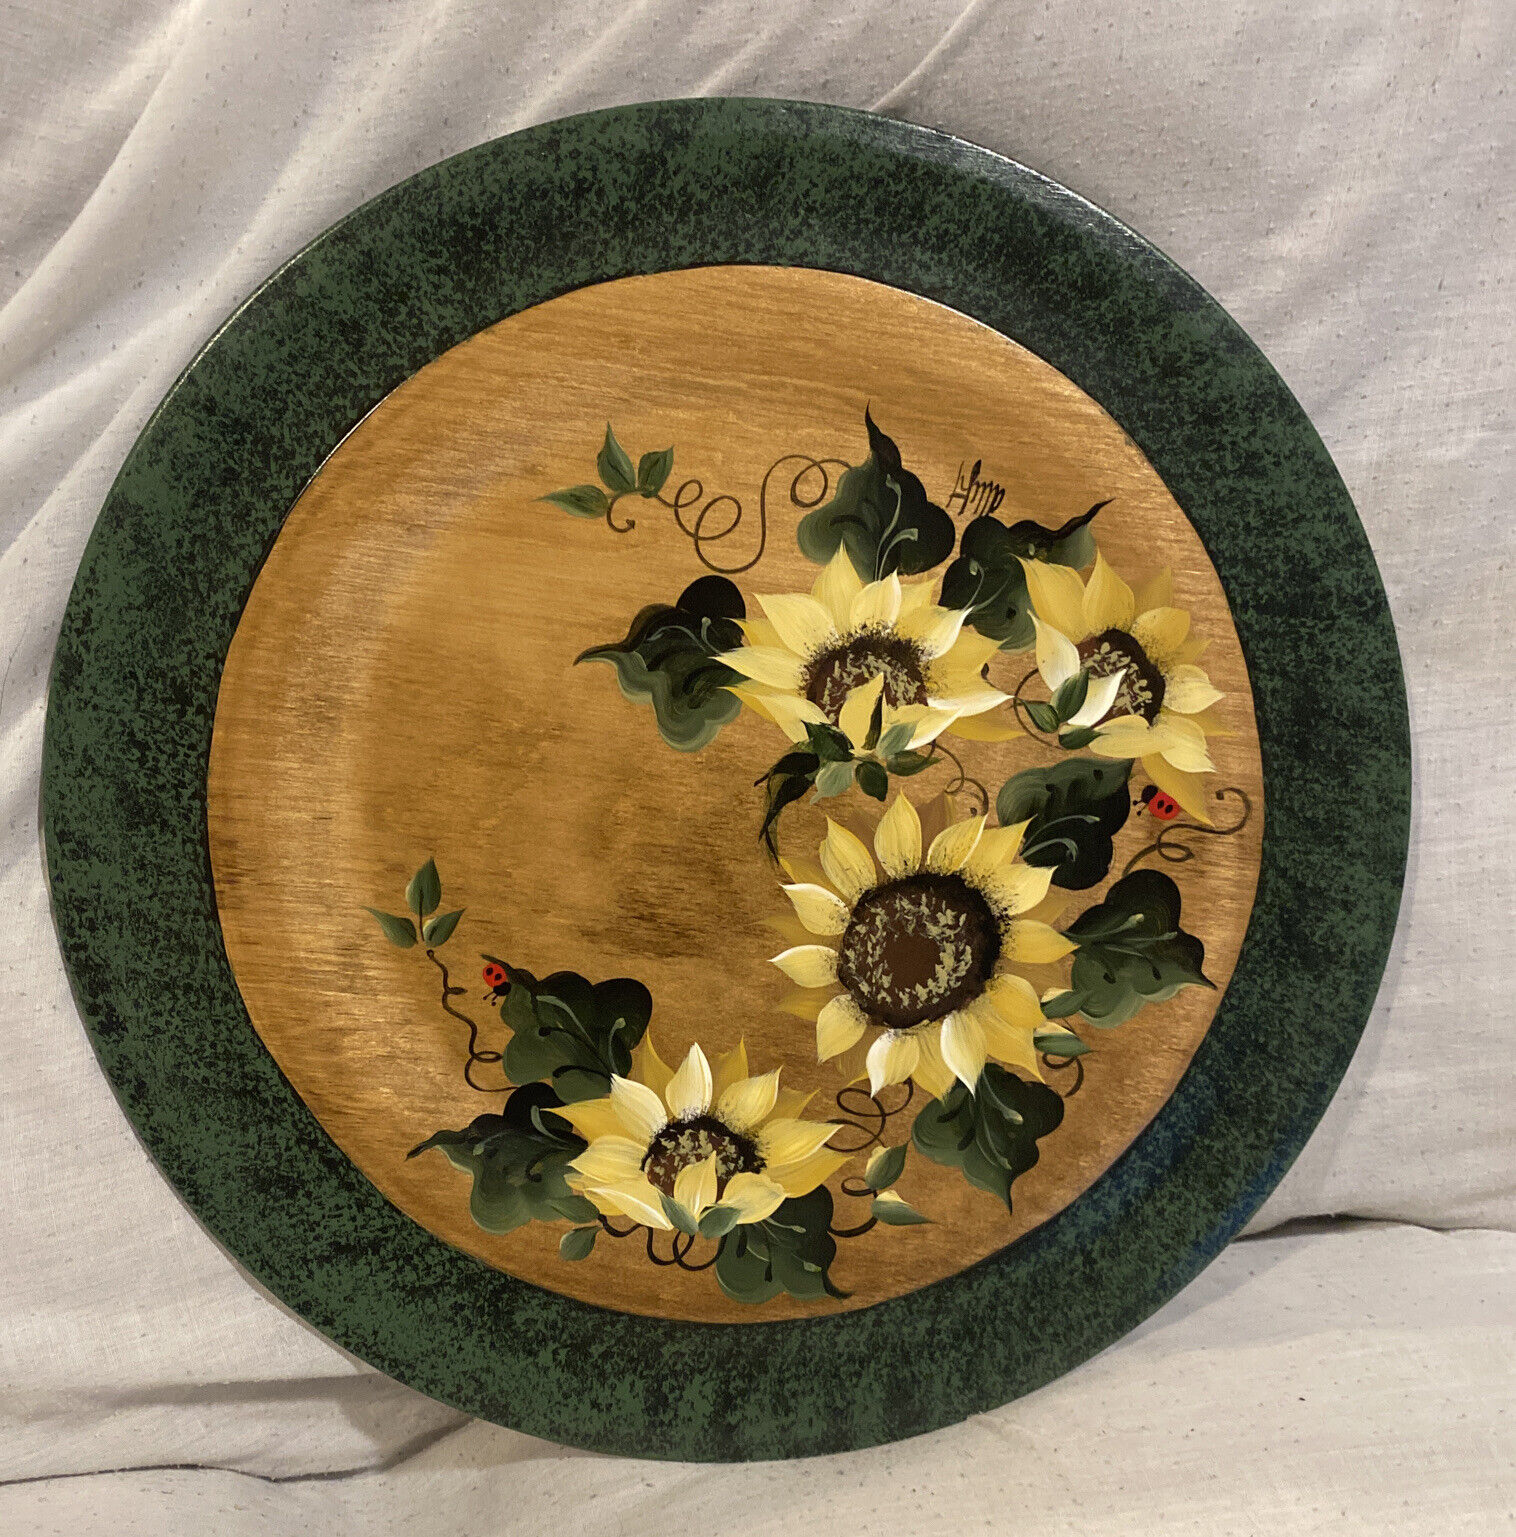 Woodzels by Wetzels Saxtons River,VT Hand Painted Wood Serving Tray Wall Art 15”